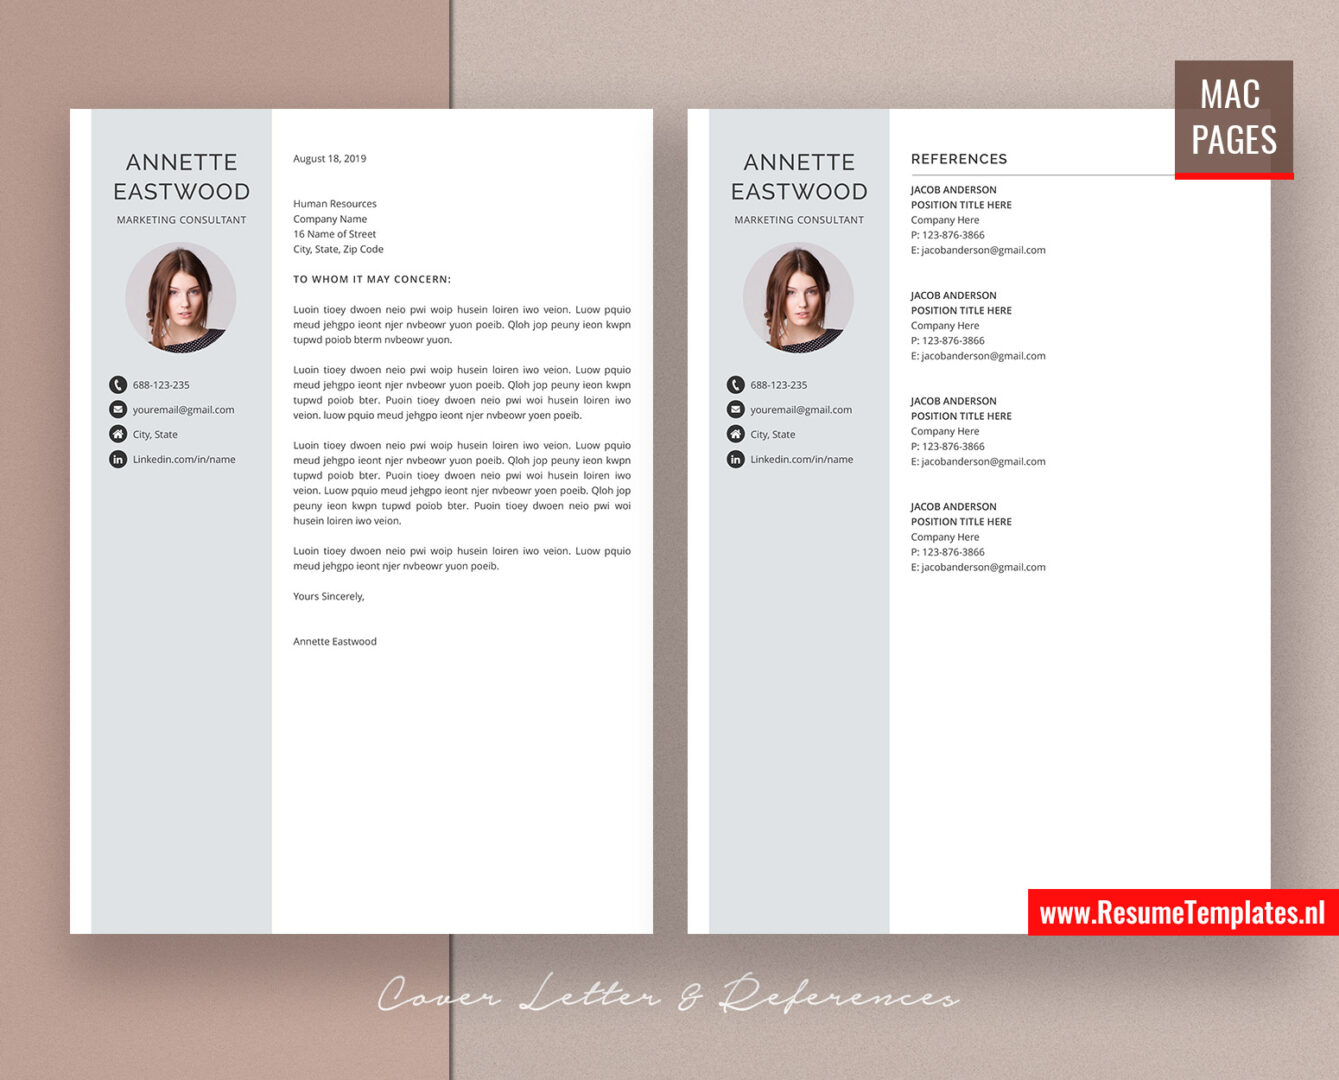 pages resume templates free mac